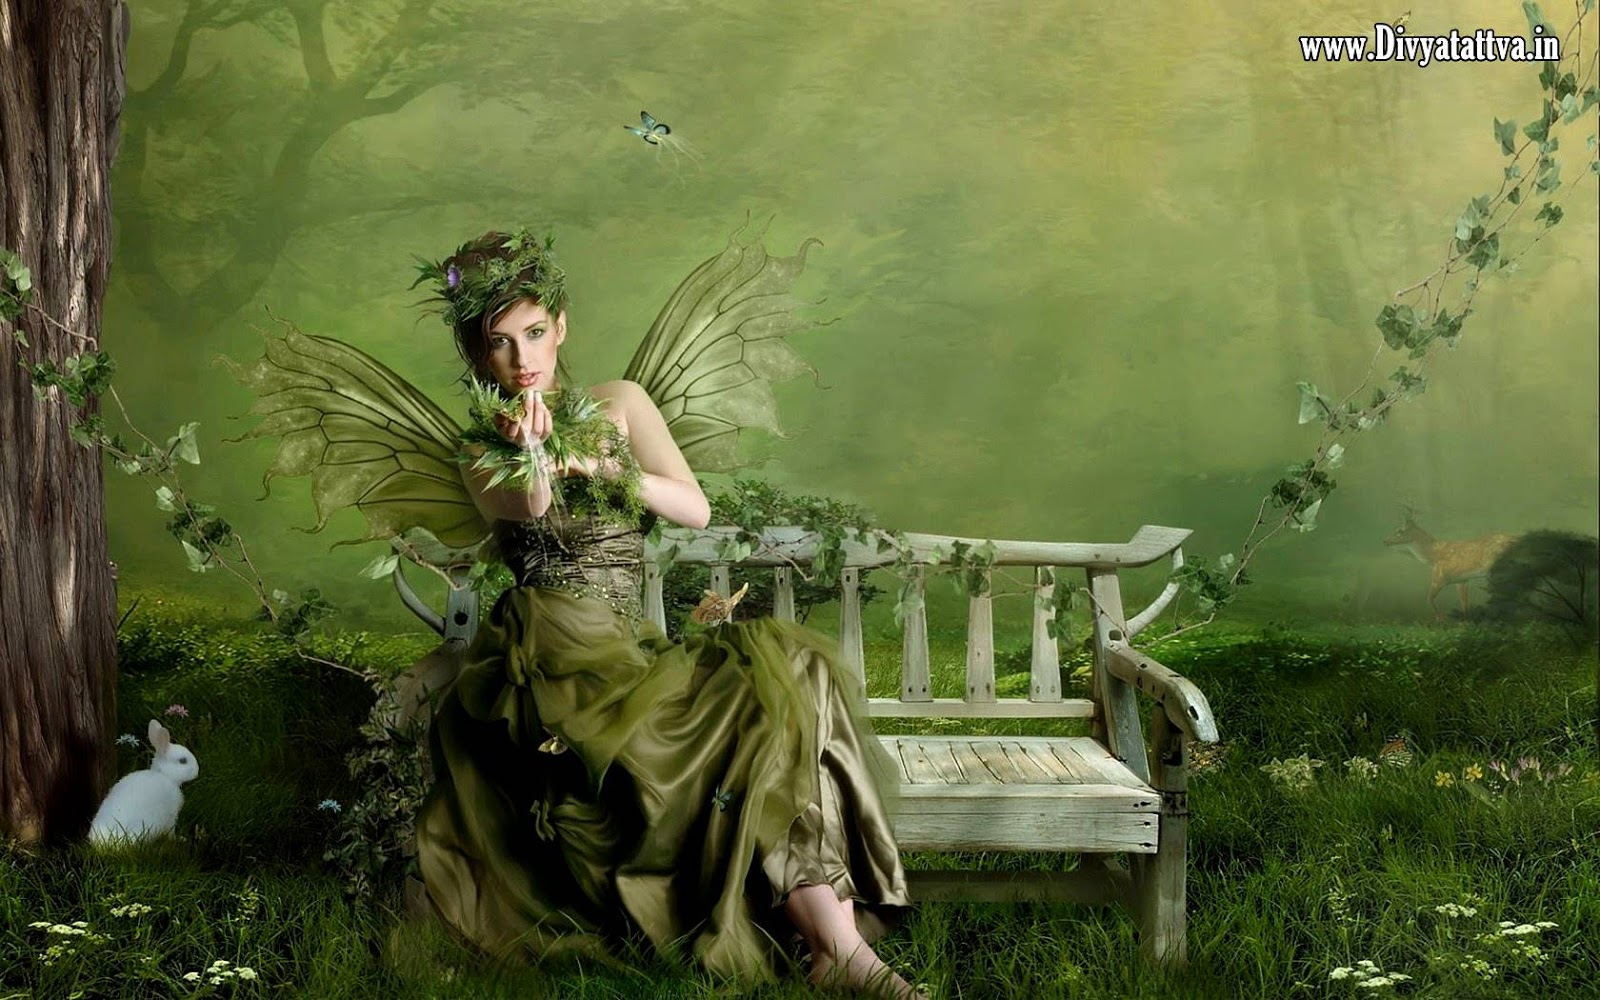 Detail Fairy Images Free Download Nomer 29